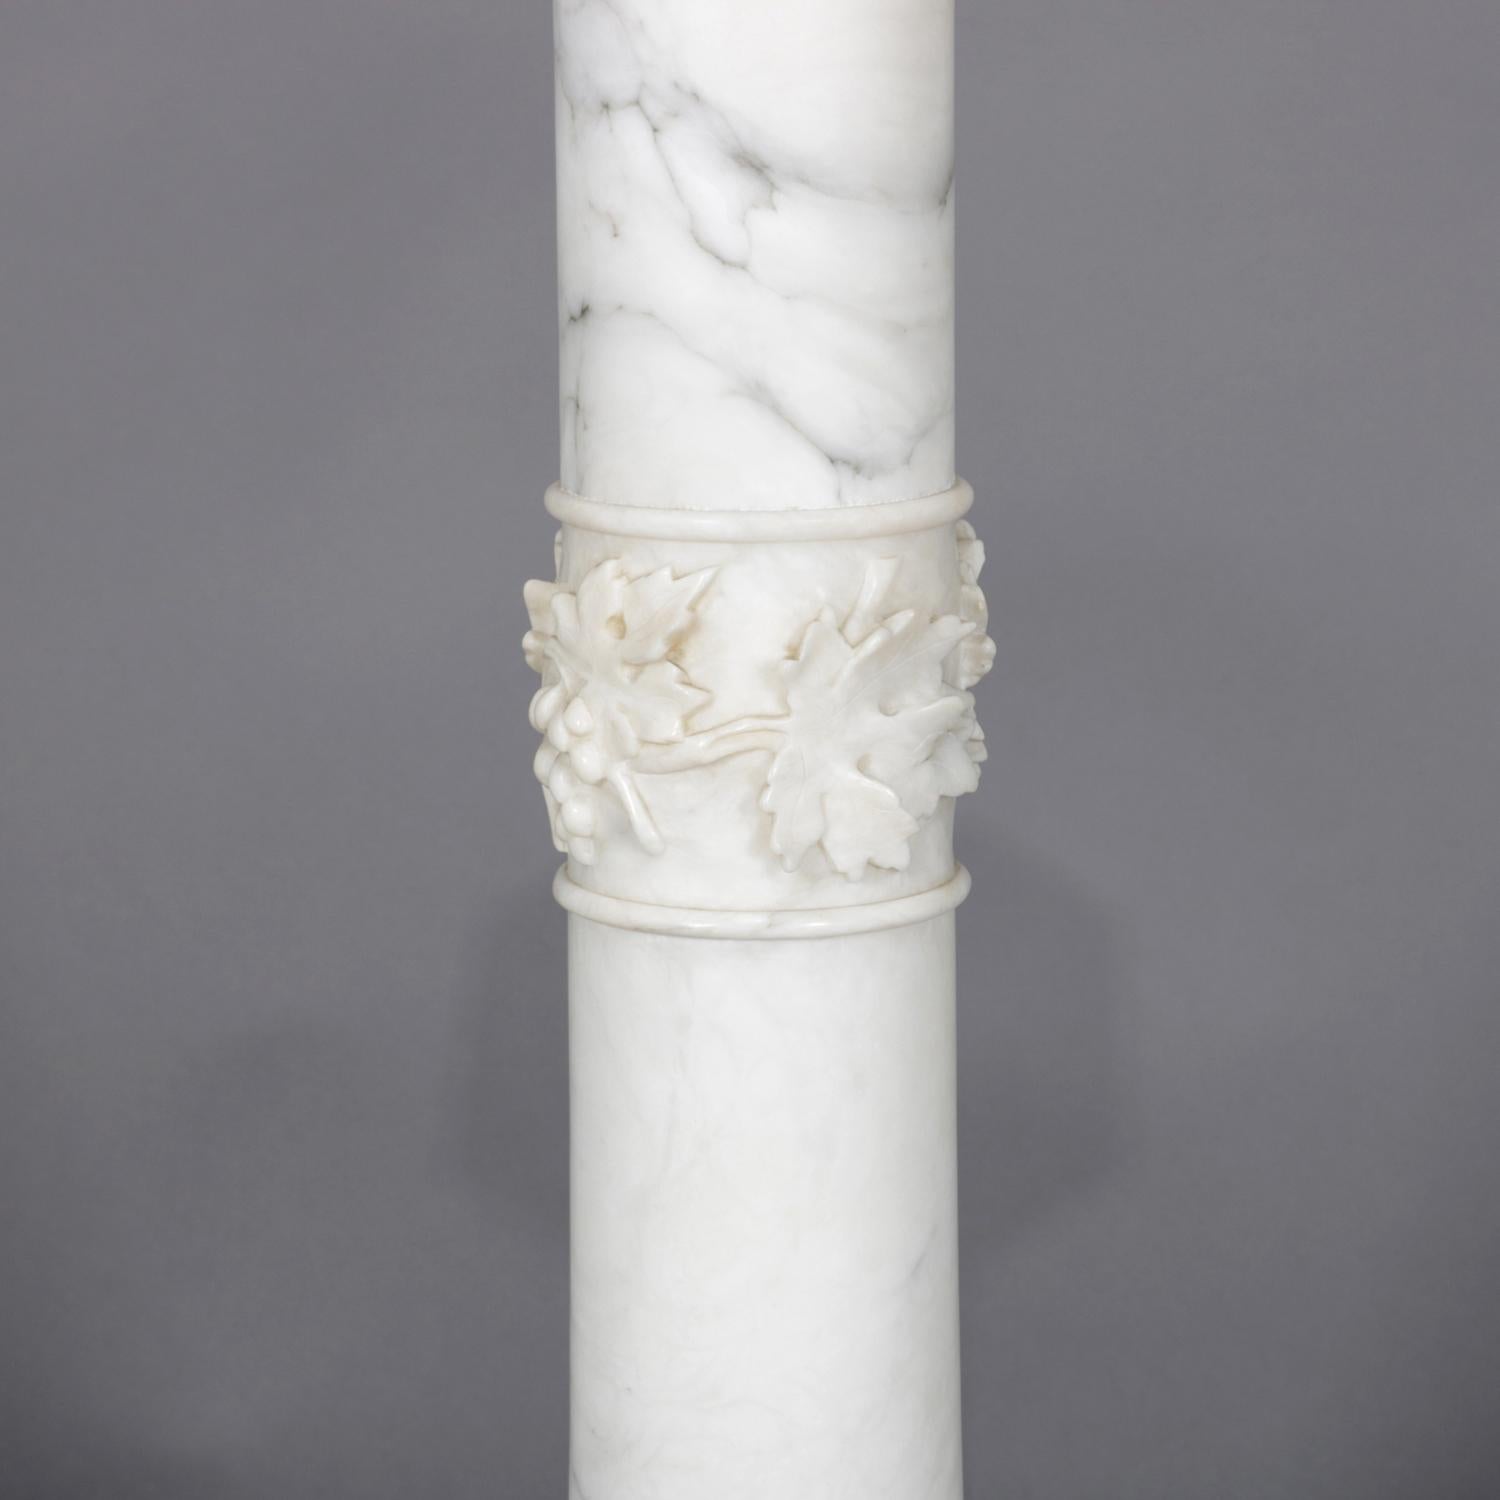 Antique marble sculpture pedestal features Classical Corinthian column-form with carved grape and leaf decoration and having clipped corner display, circa 1900.

Measures: 42